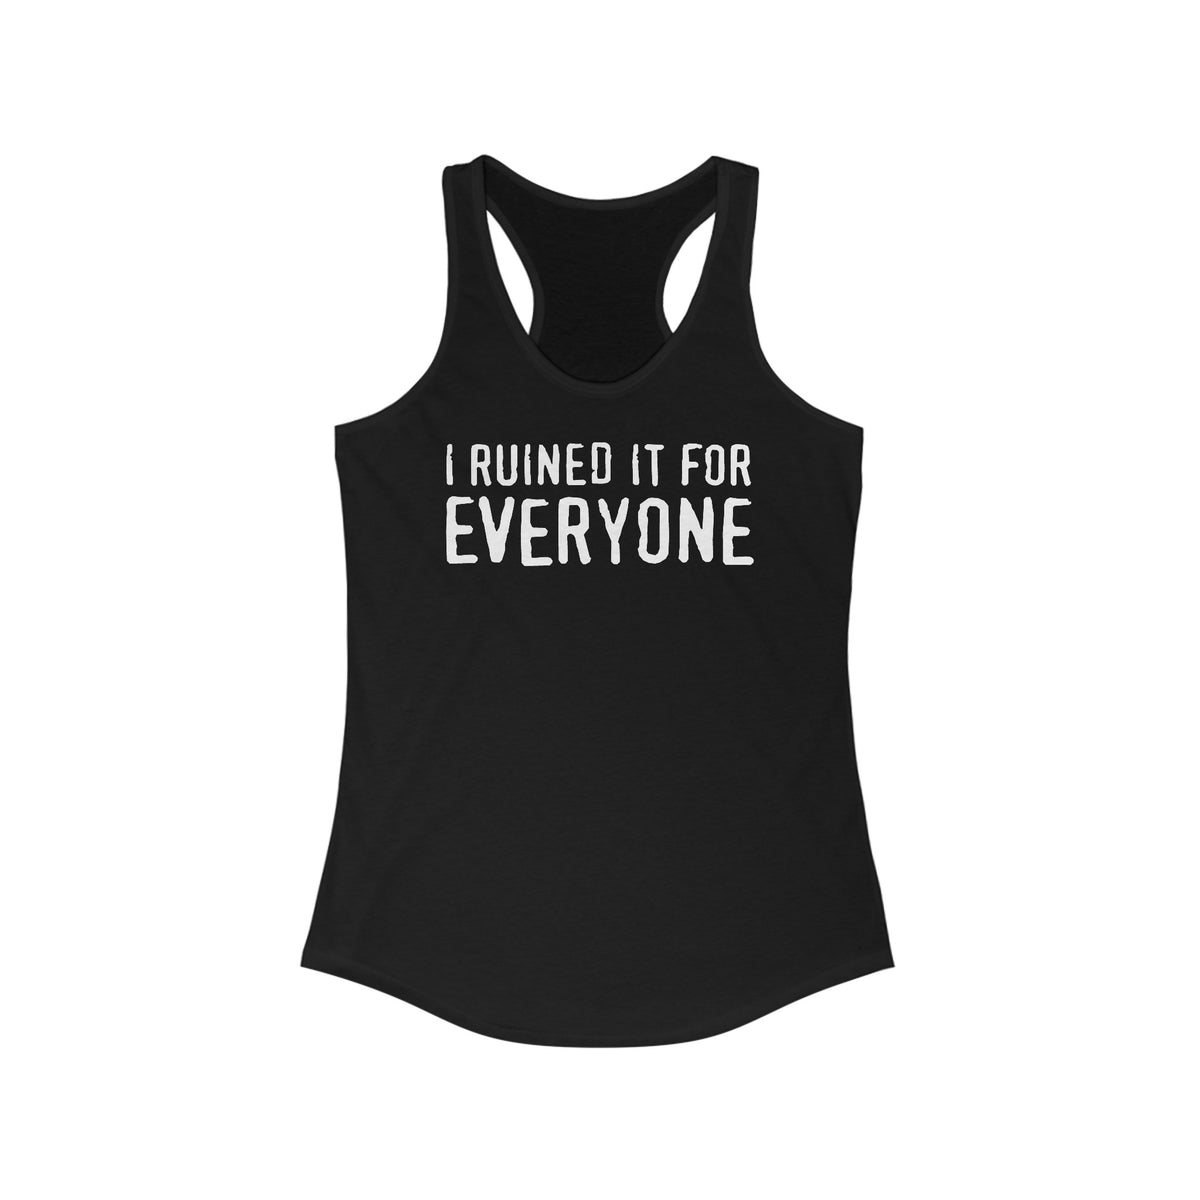 I Ruined It For Everyone - Women's Racerback Tank